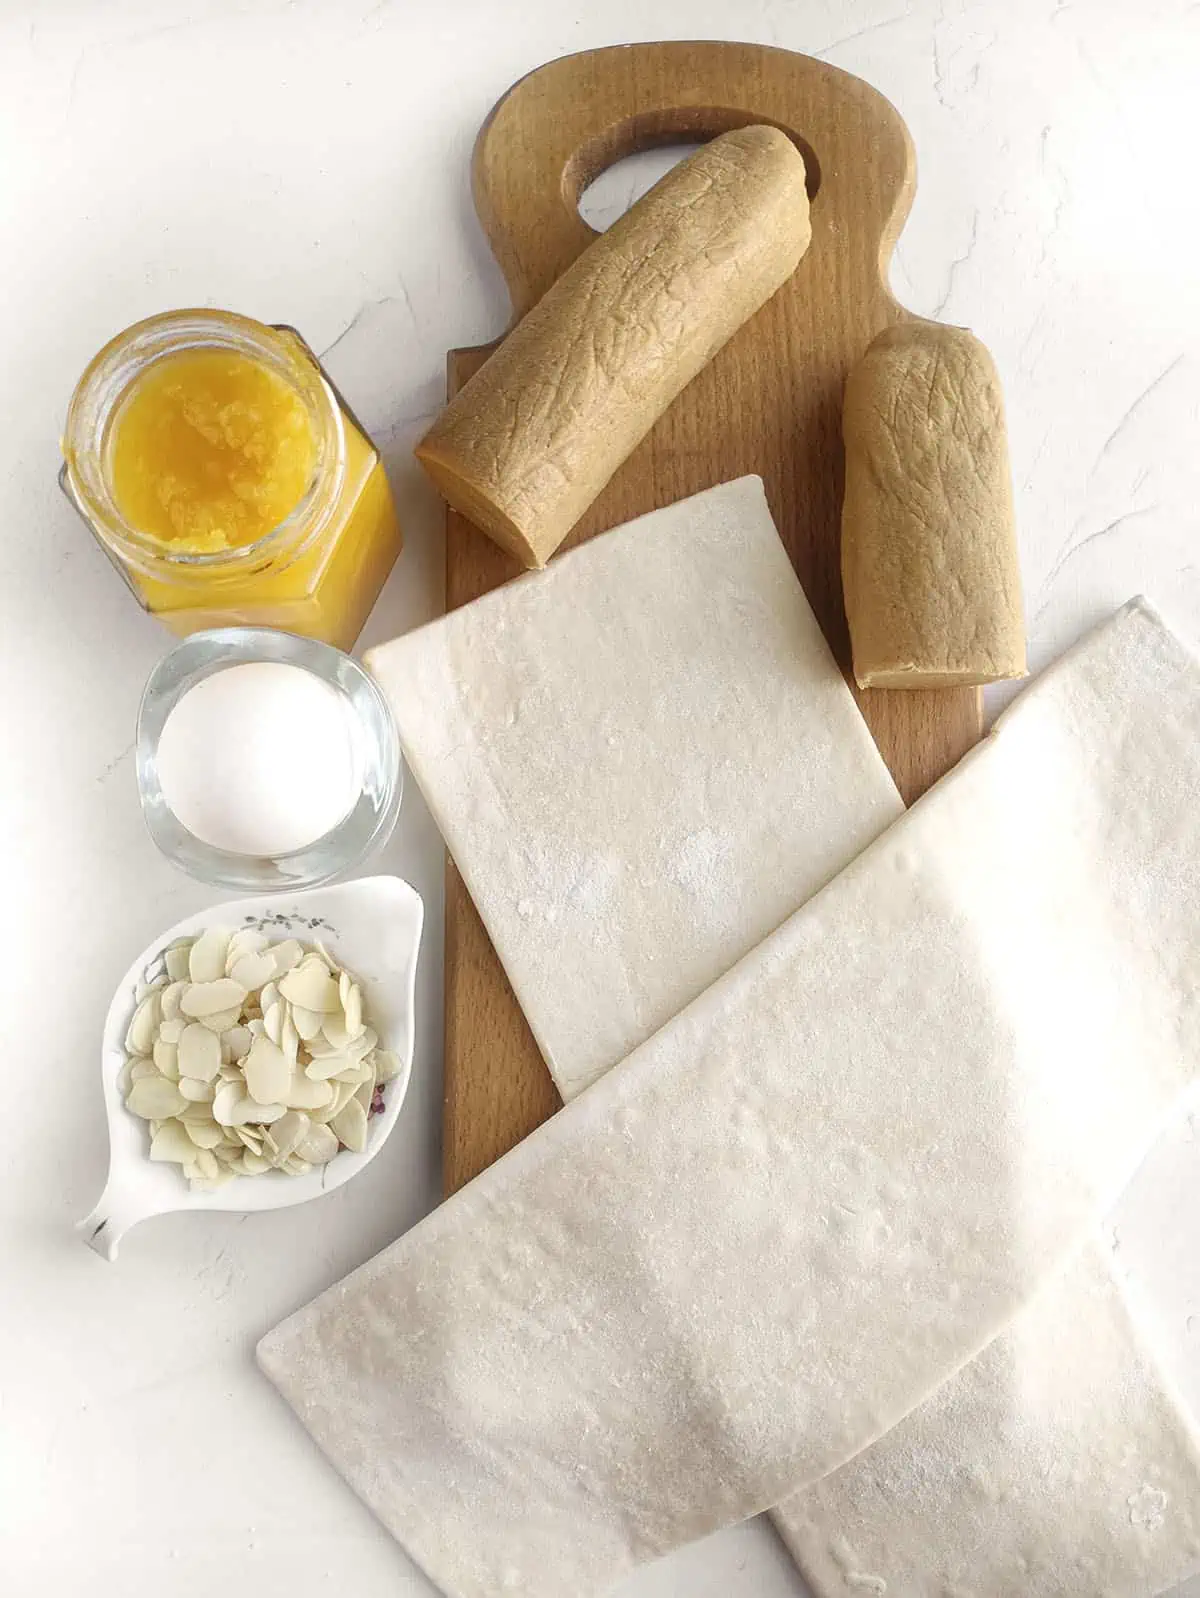 The ingredients to make Dutch Banket. Almond paste, puff pastry, apricot jam, and egg, shaved almonds and icing sugar.